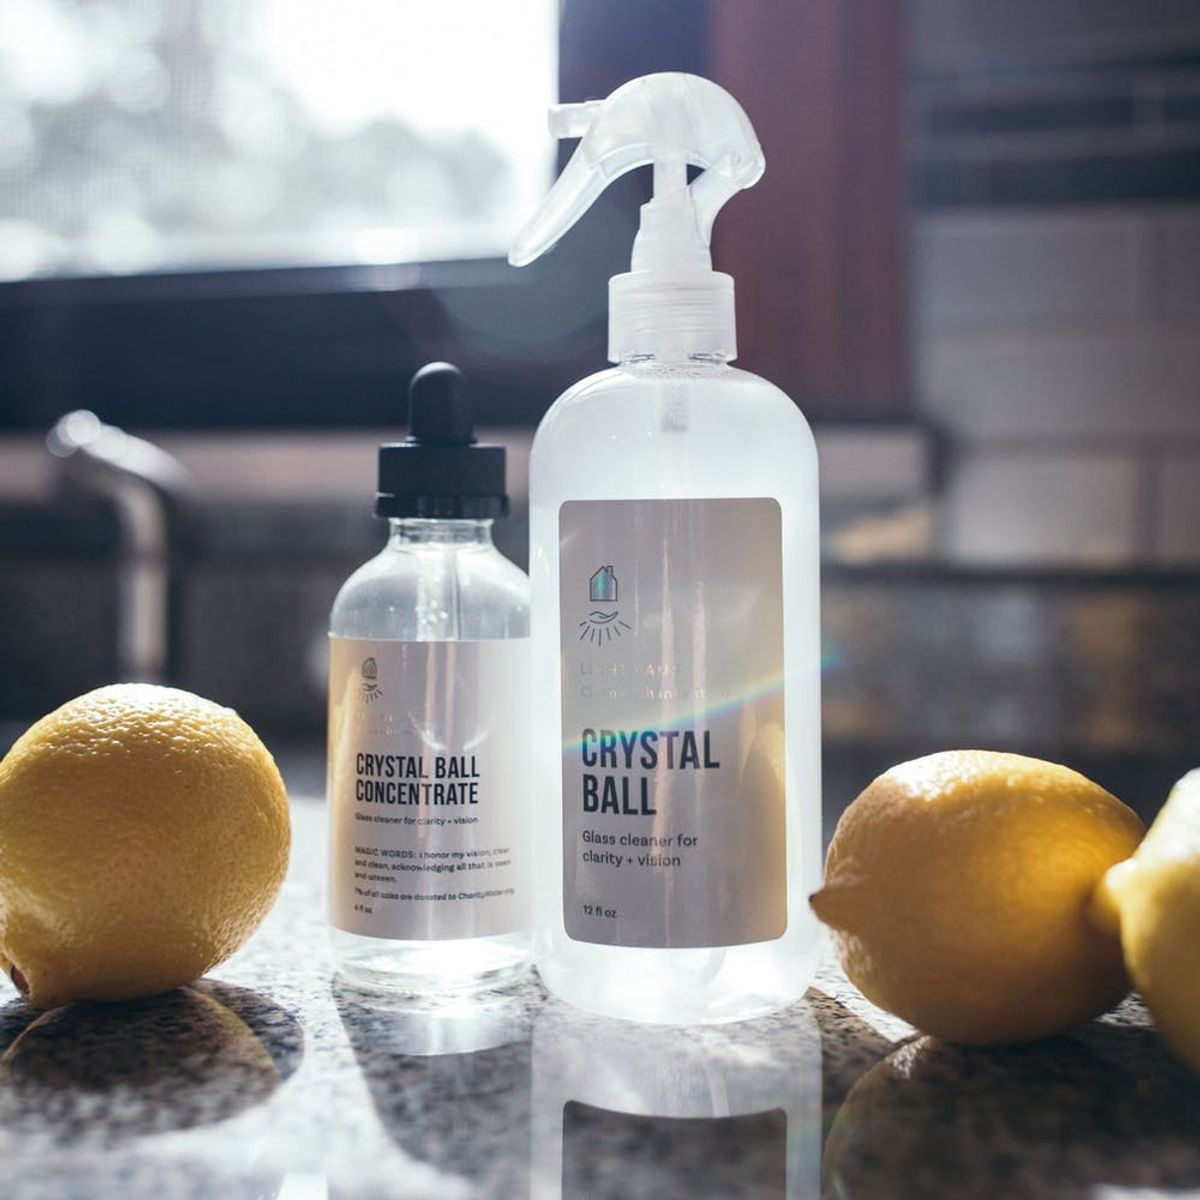 Bring Some Very Practical Magic to Your Home With These Witch-Approved Cleaning Products